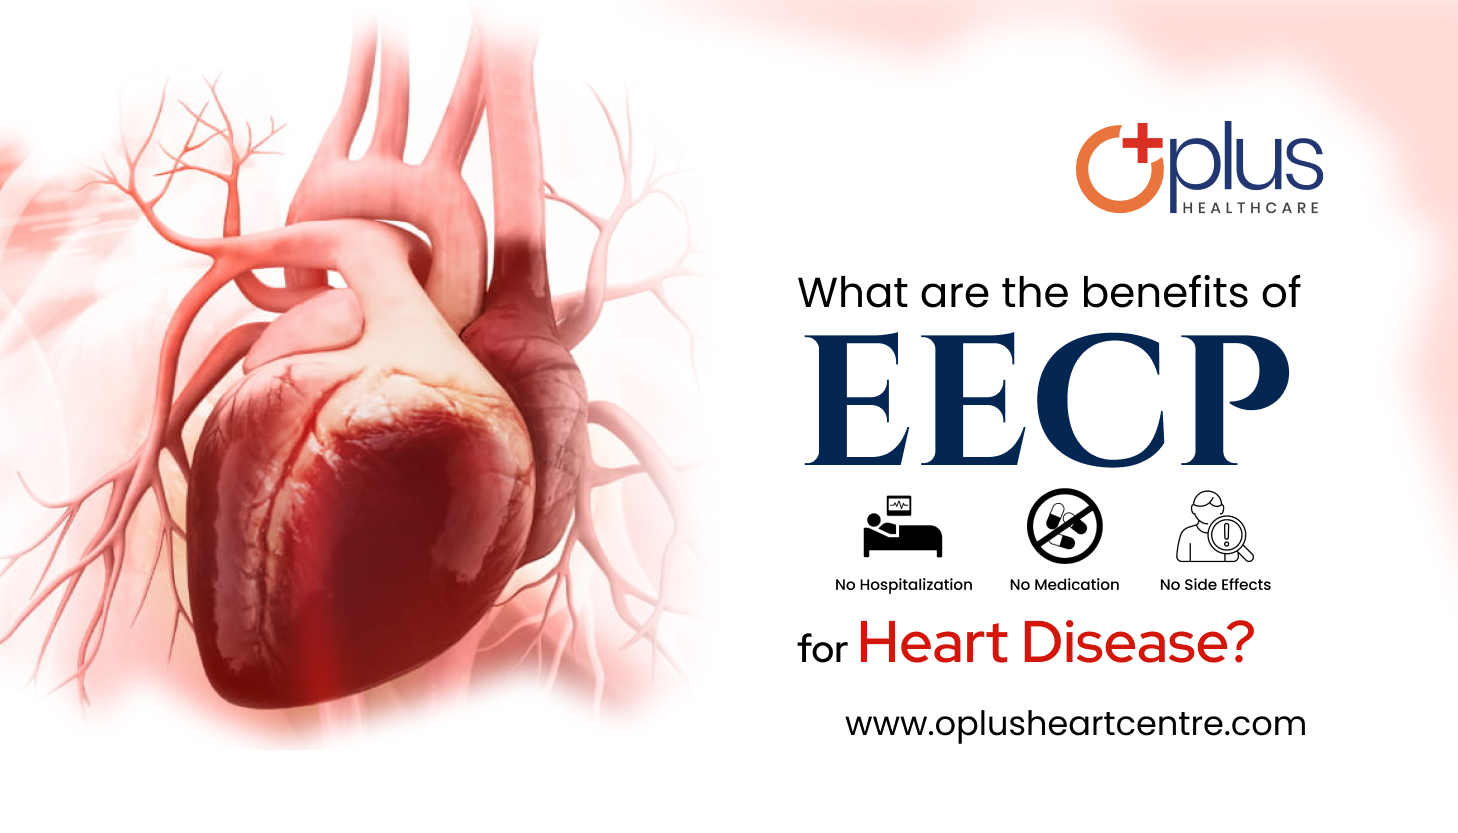 What are the benefits of EECP for Heart Disease?